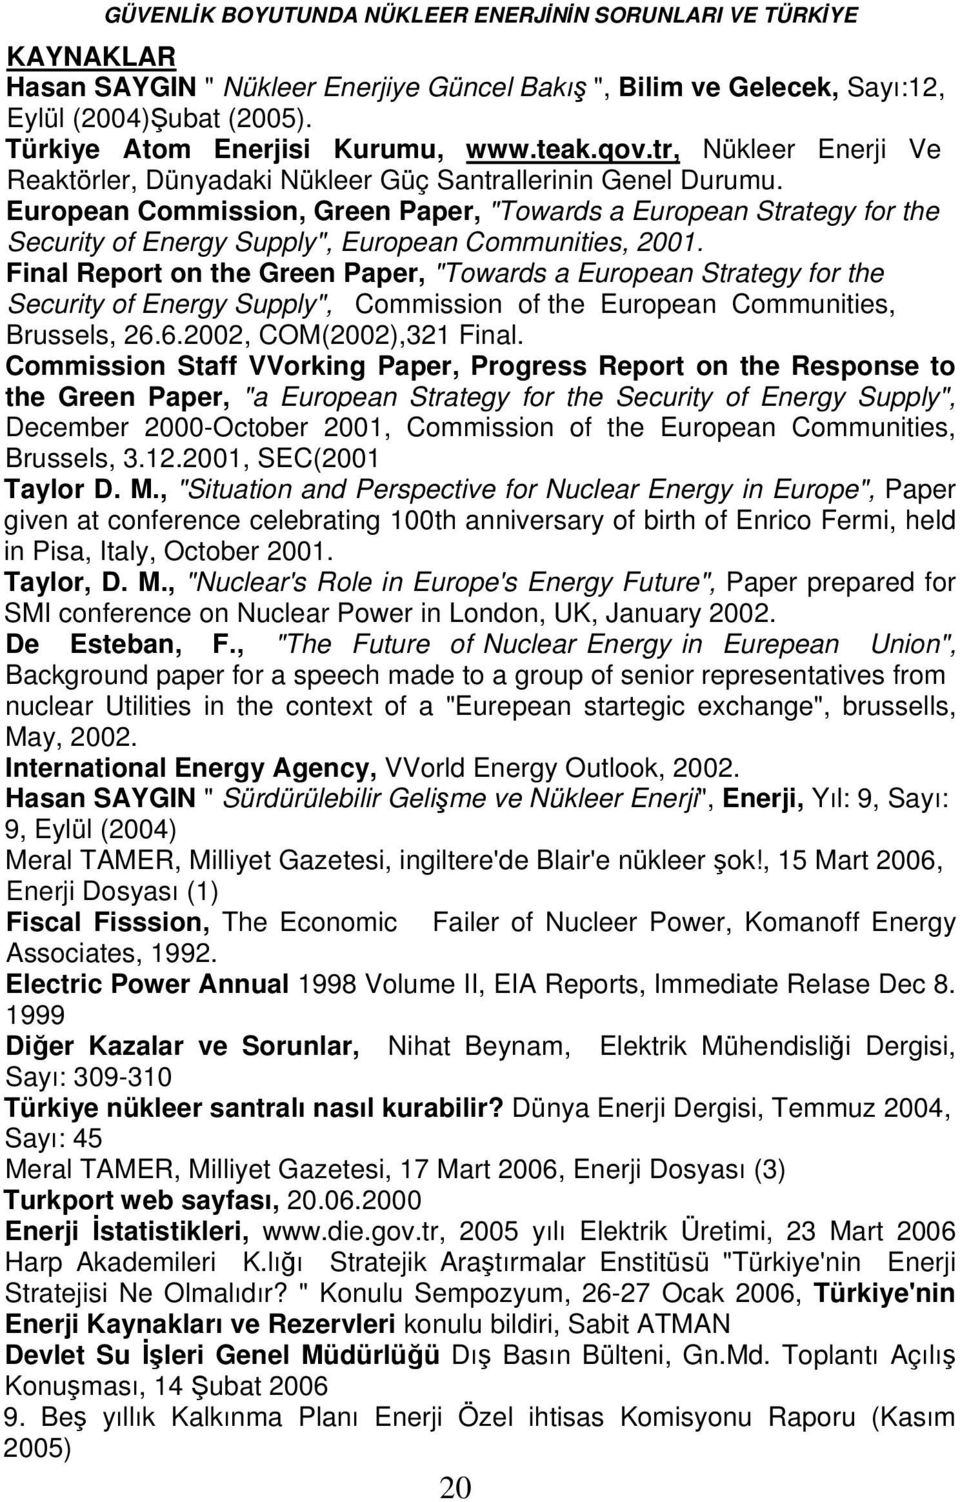 European Commission, Green Paper, "Towards a European Strategy for the Security of Energy Supply", European Communities, 2001.